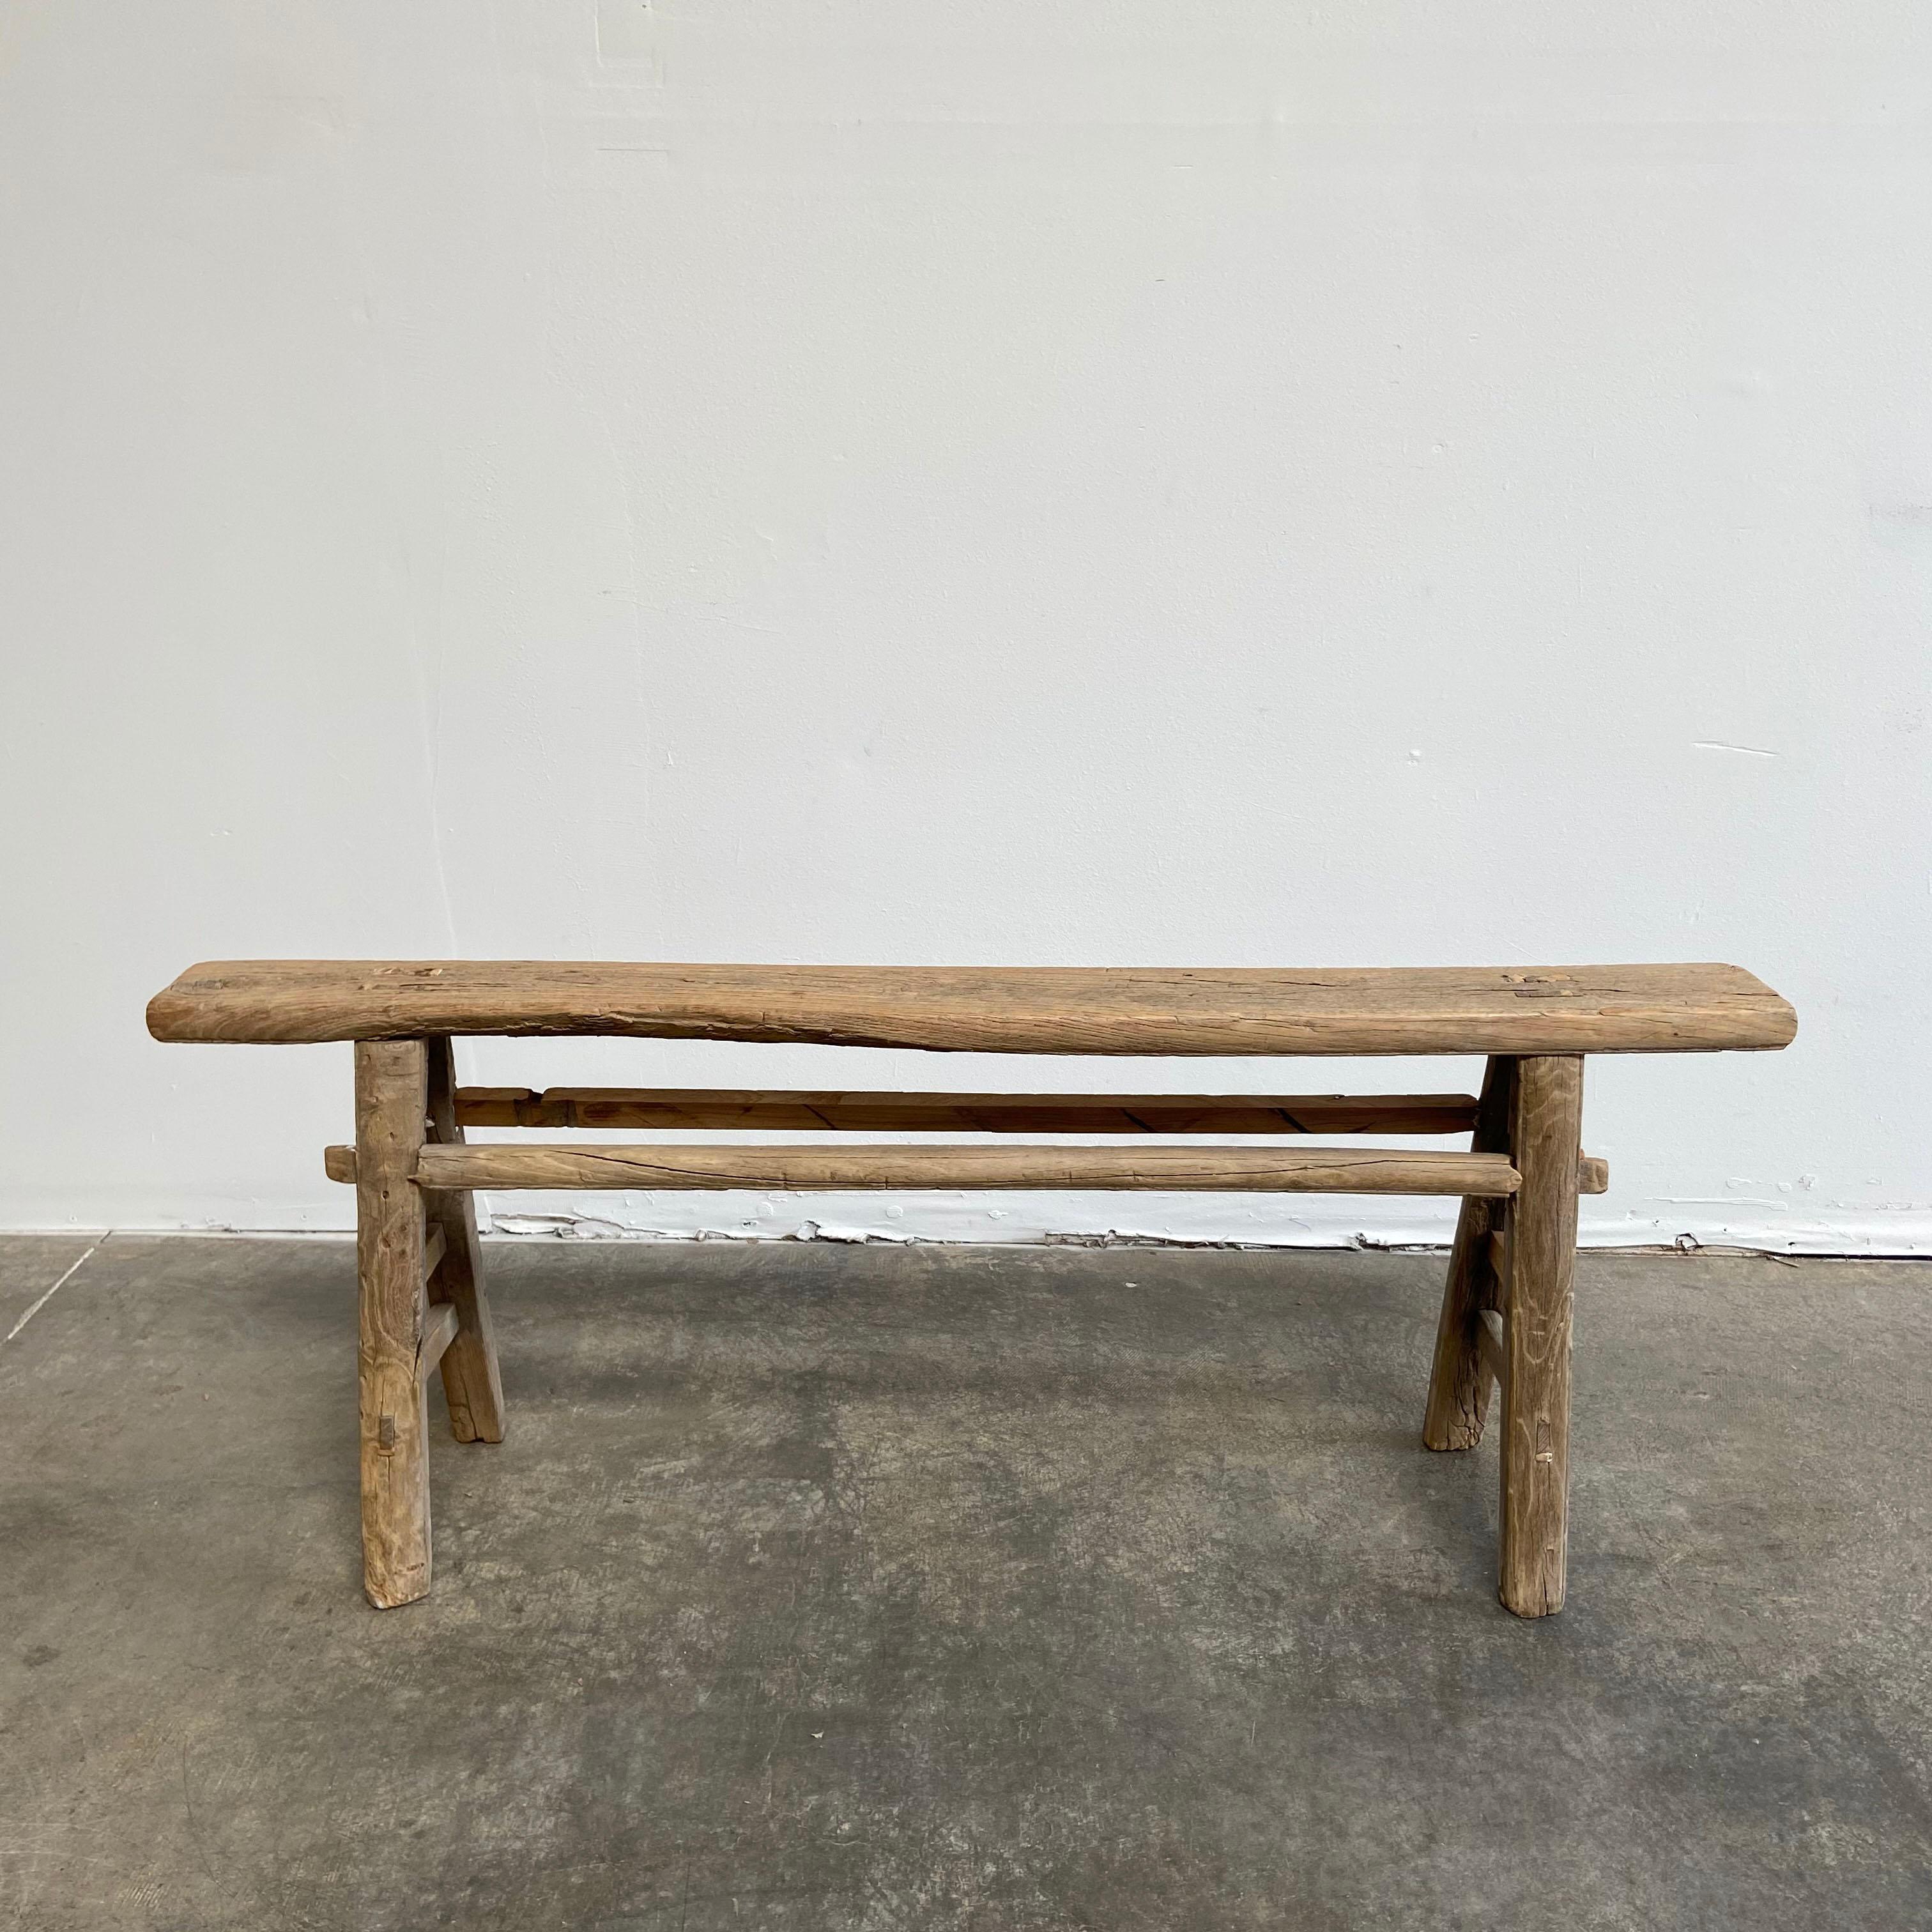 Skinny bench / vintage antique elm wood bench
These are the real vintage antique elm wood benches! Beautiful antique patina, with weathering and age, these are solid and sturdy ready for daily use, use as as a table behind a sofa, stool, coffee